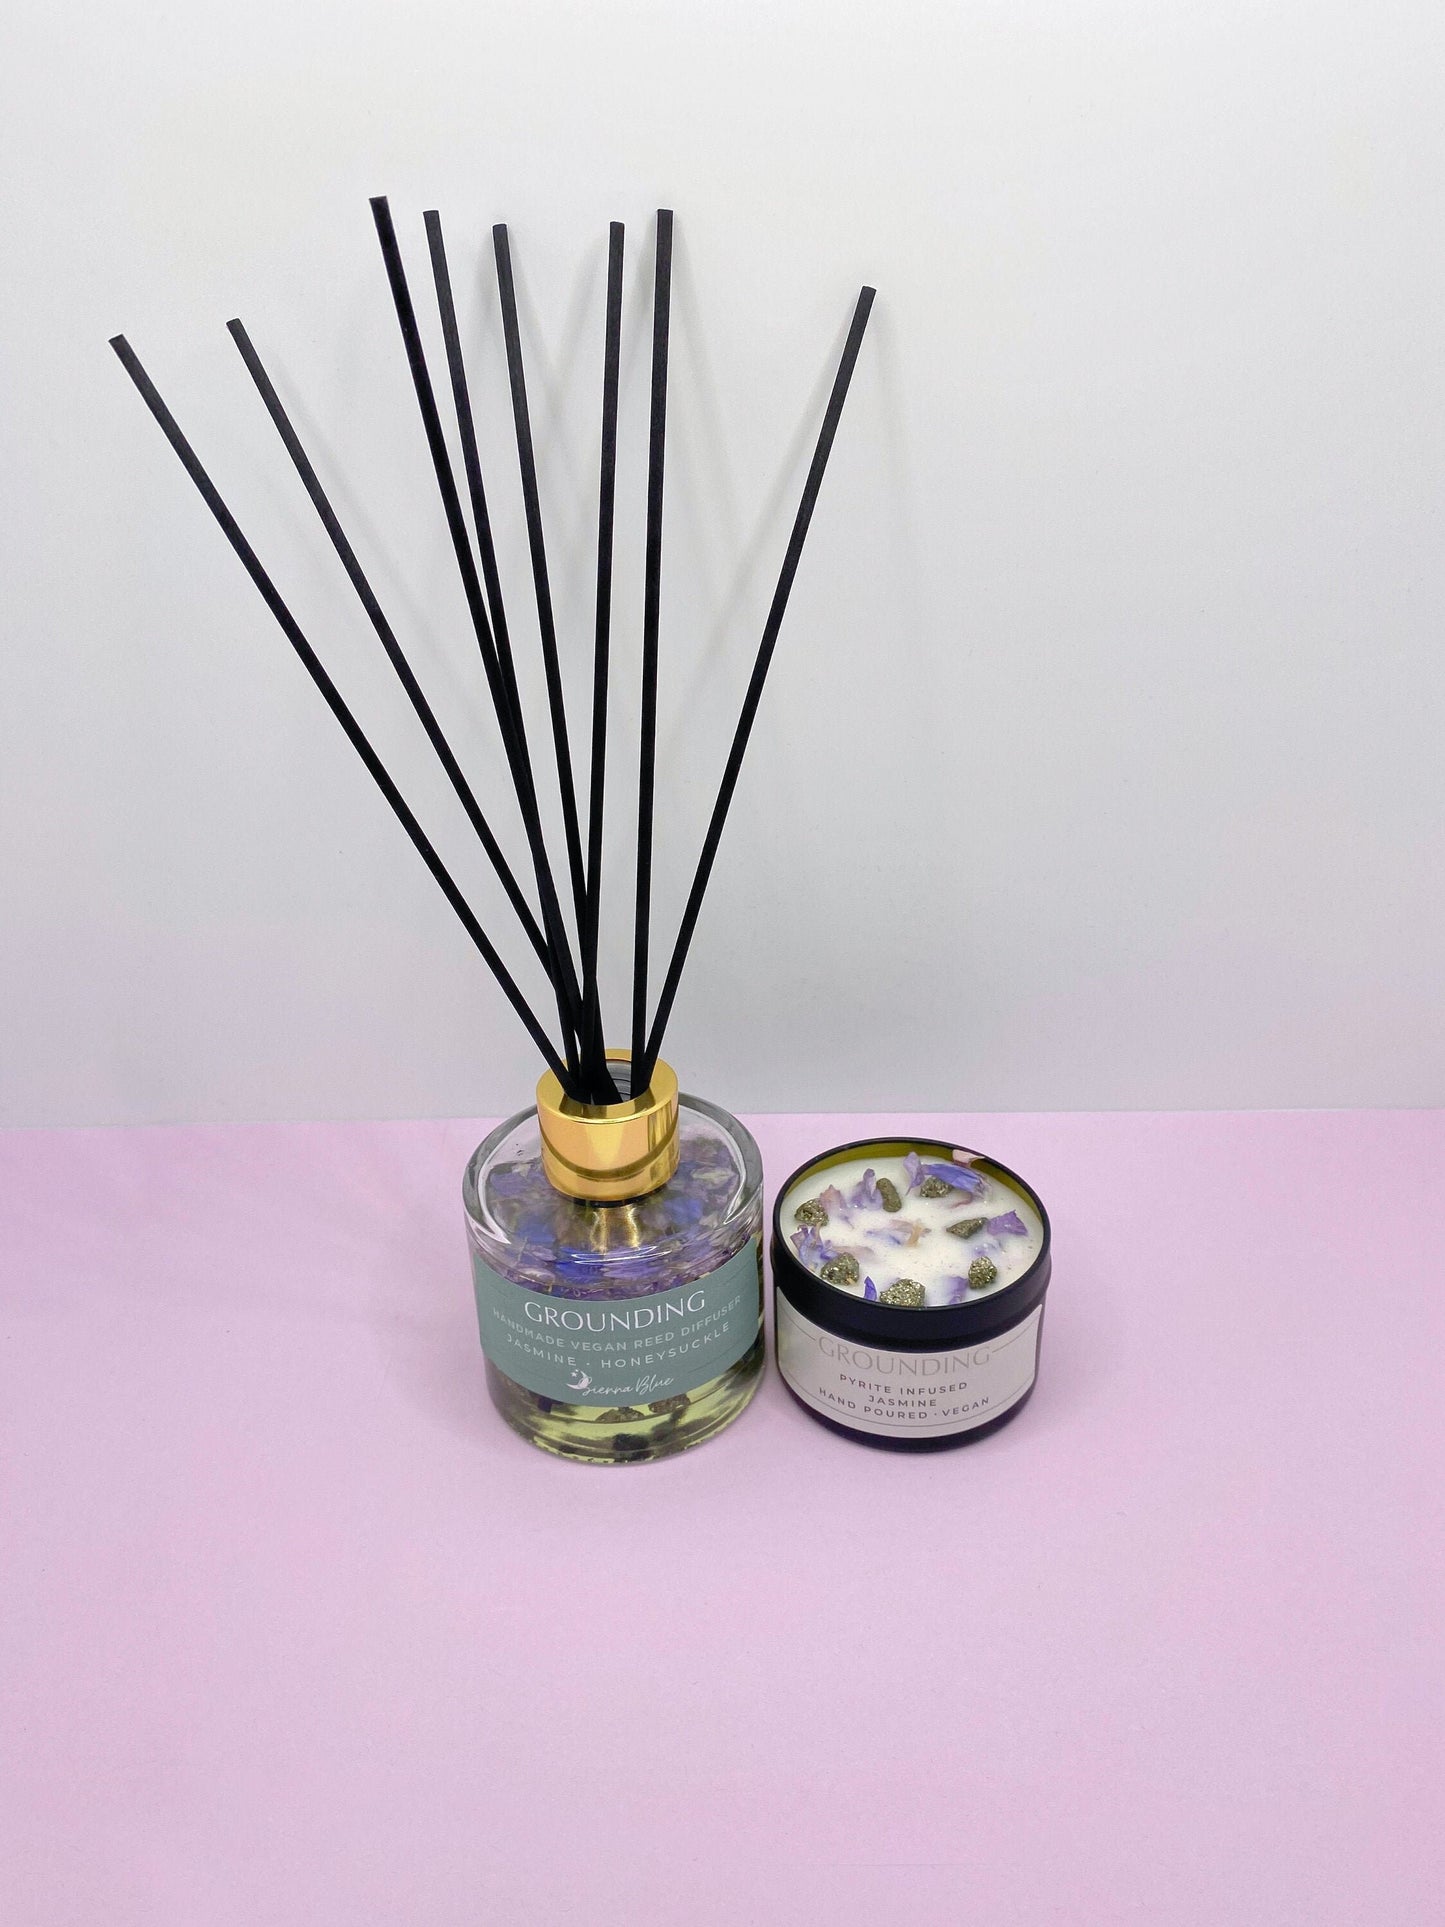 Grounding candle and diffuser set